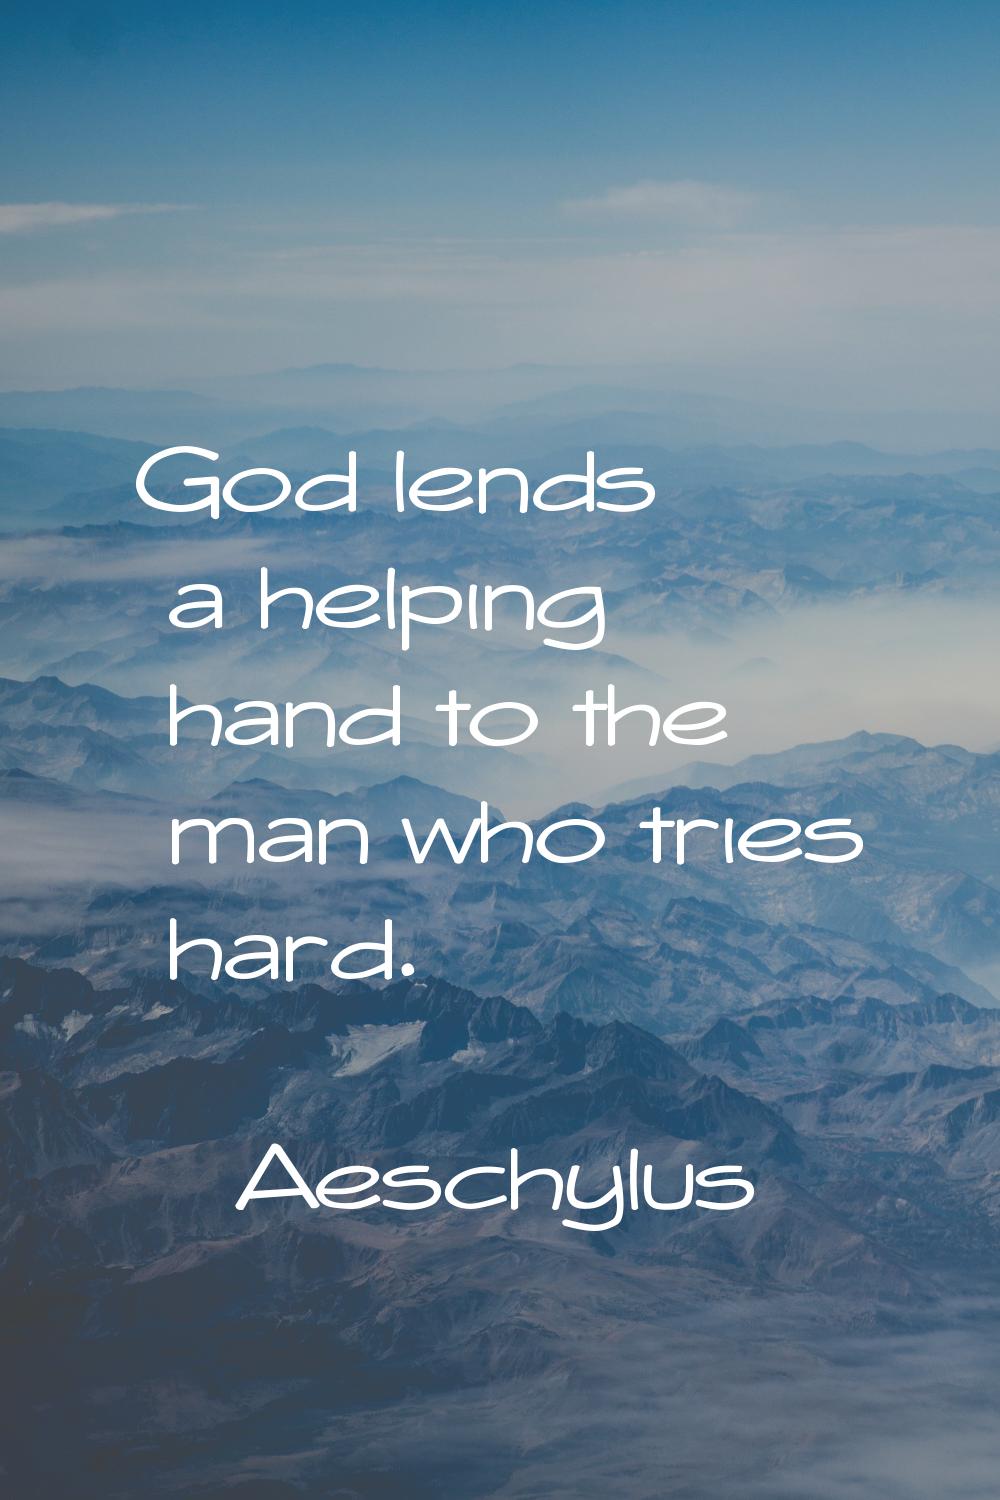 God lends a helping hand to the man who tries hard.